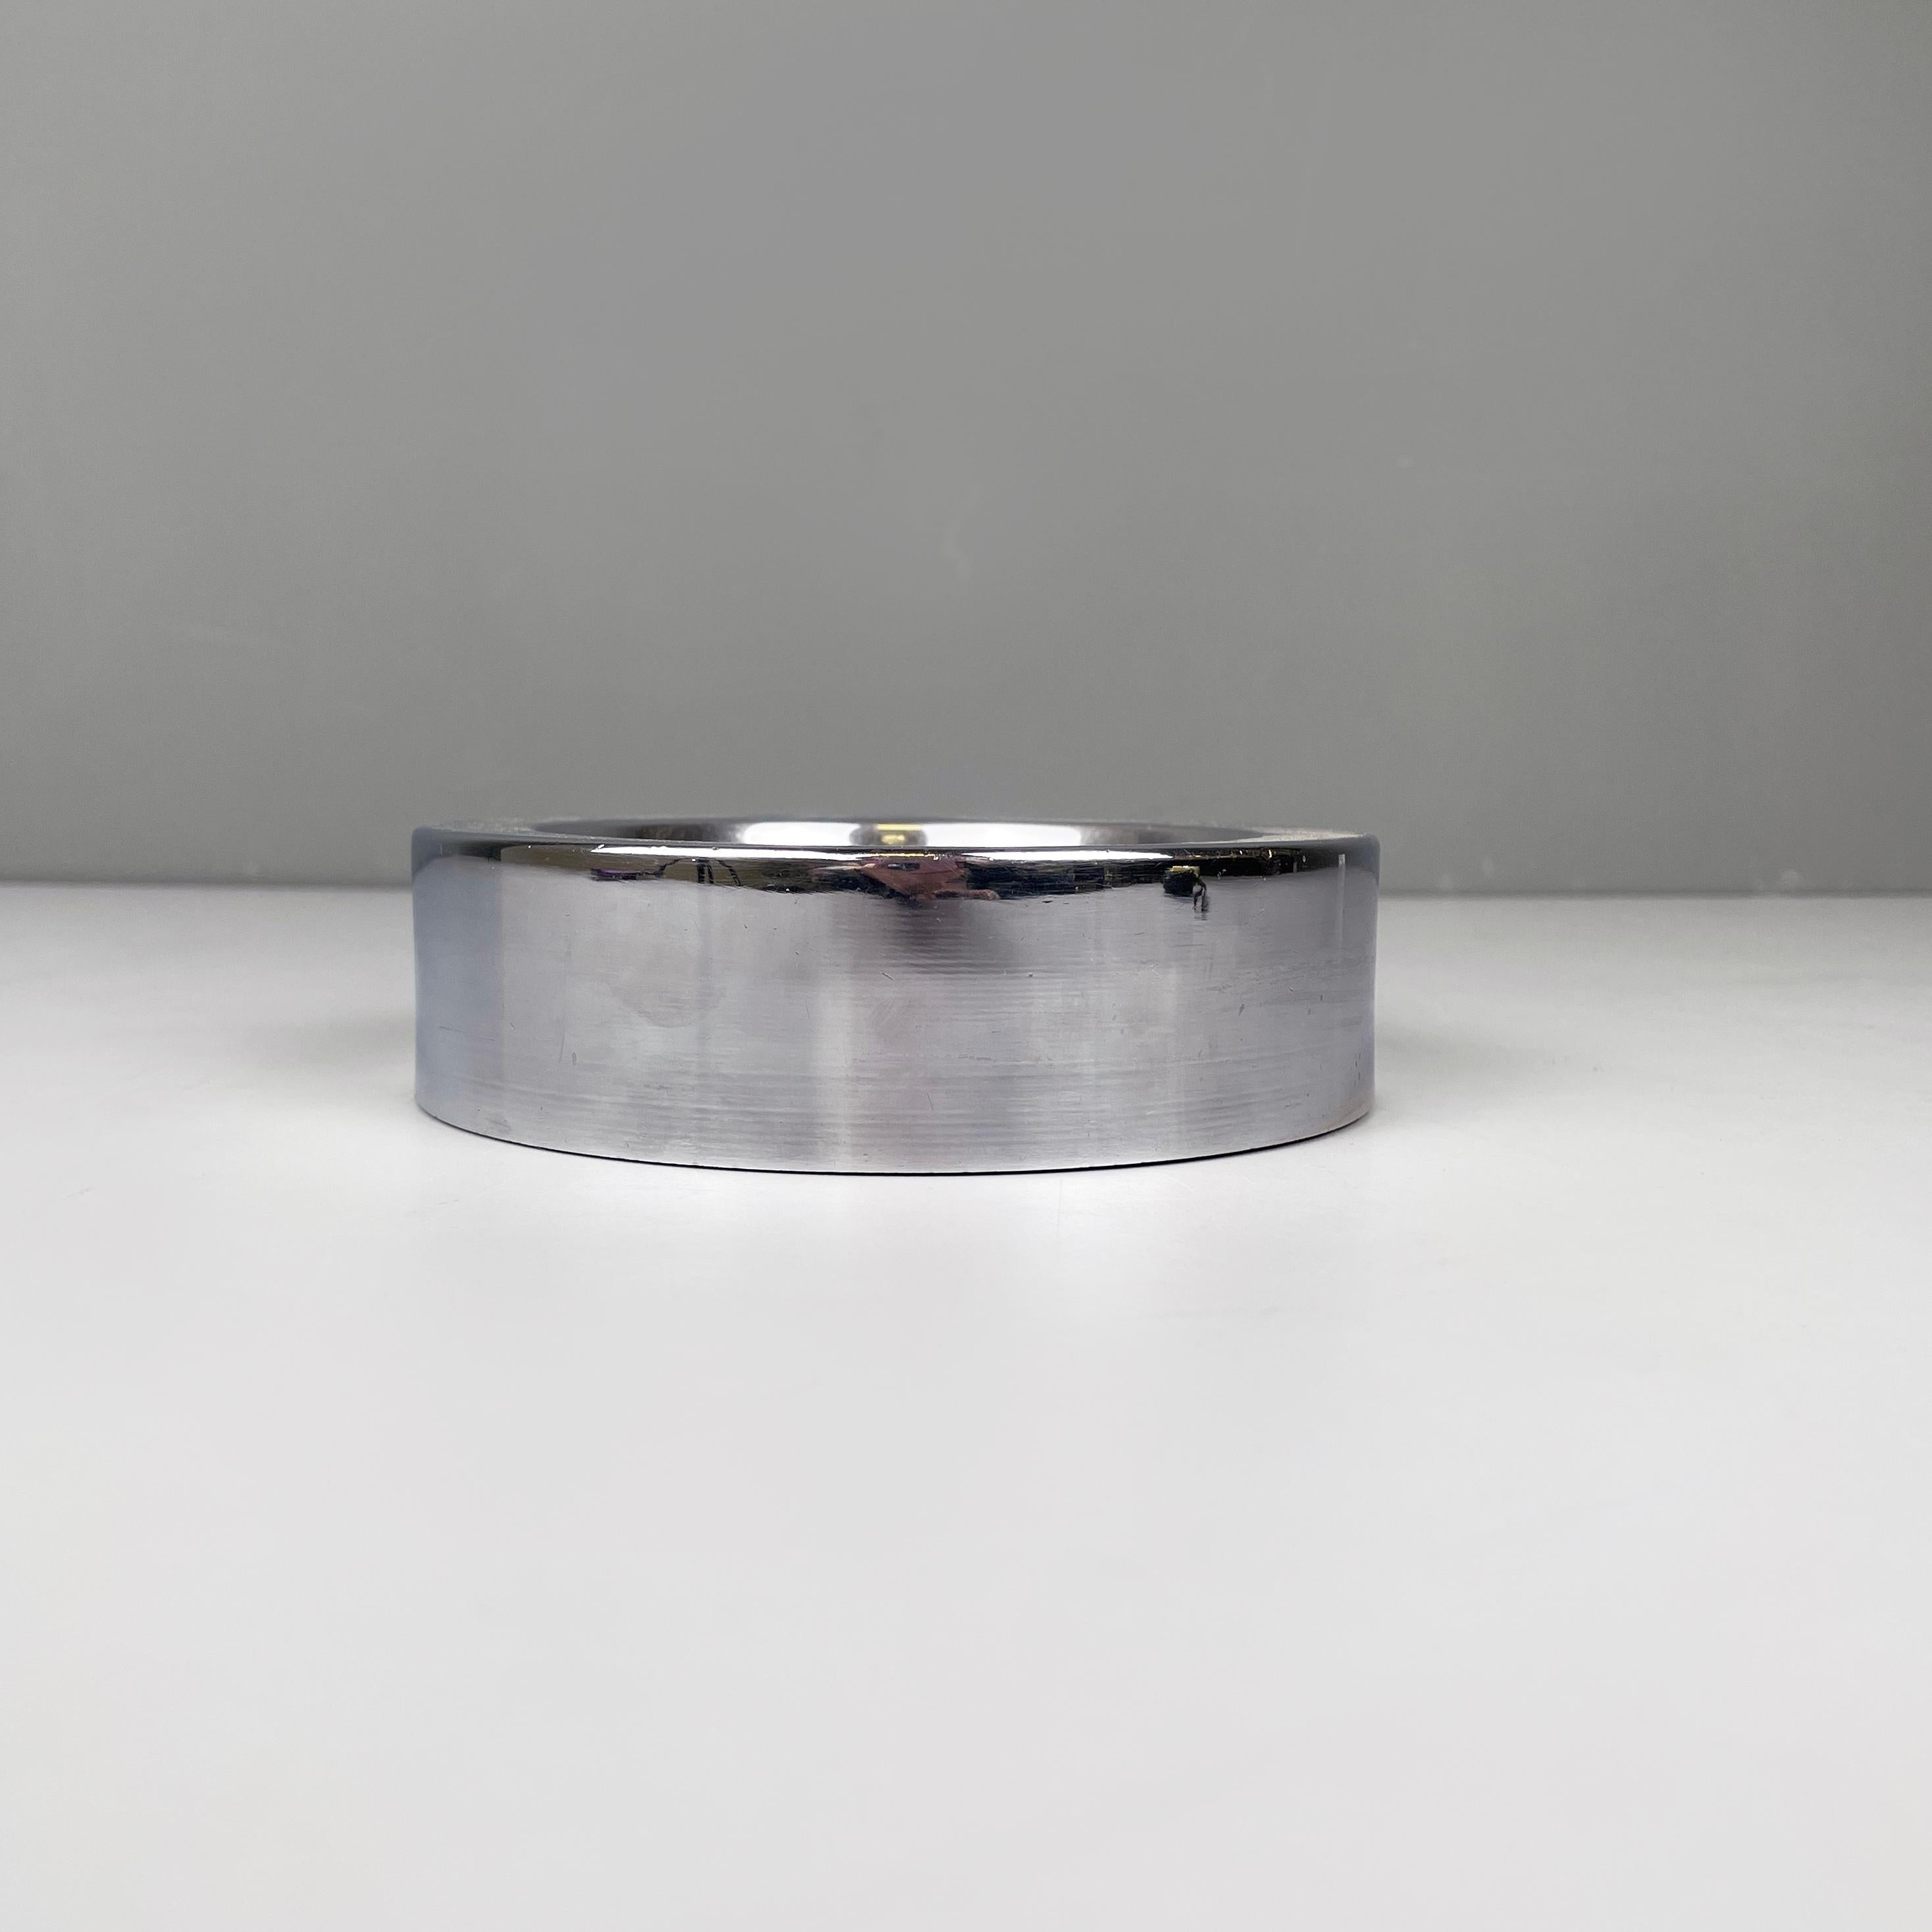 Italian modern round table ashtray in steel by Dada International Design, 1980s
Round table ashtray in steel. The central dish is concluded with a thick edge.
It was produced by Dada International Design in the 1980s.
Good condition, it has